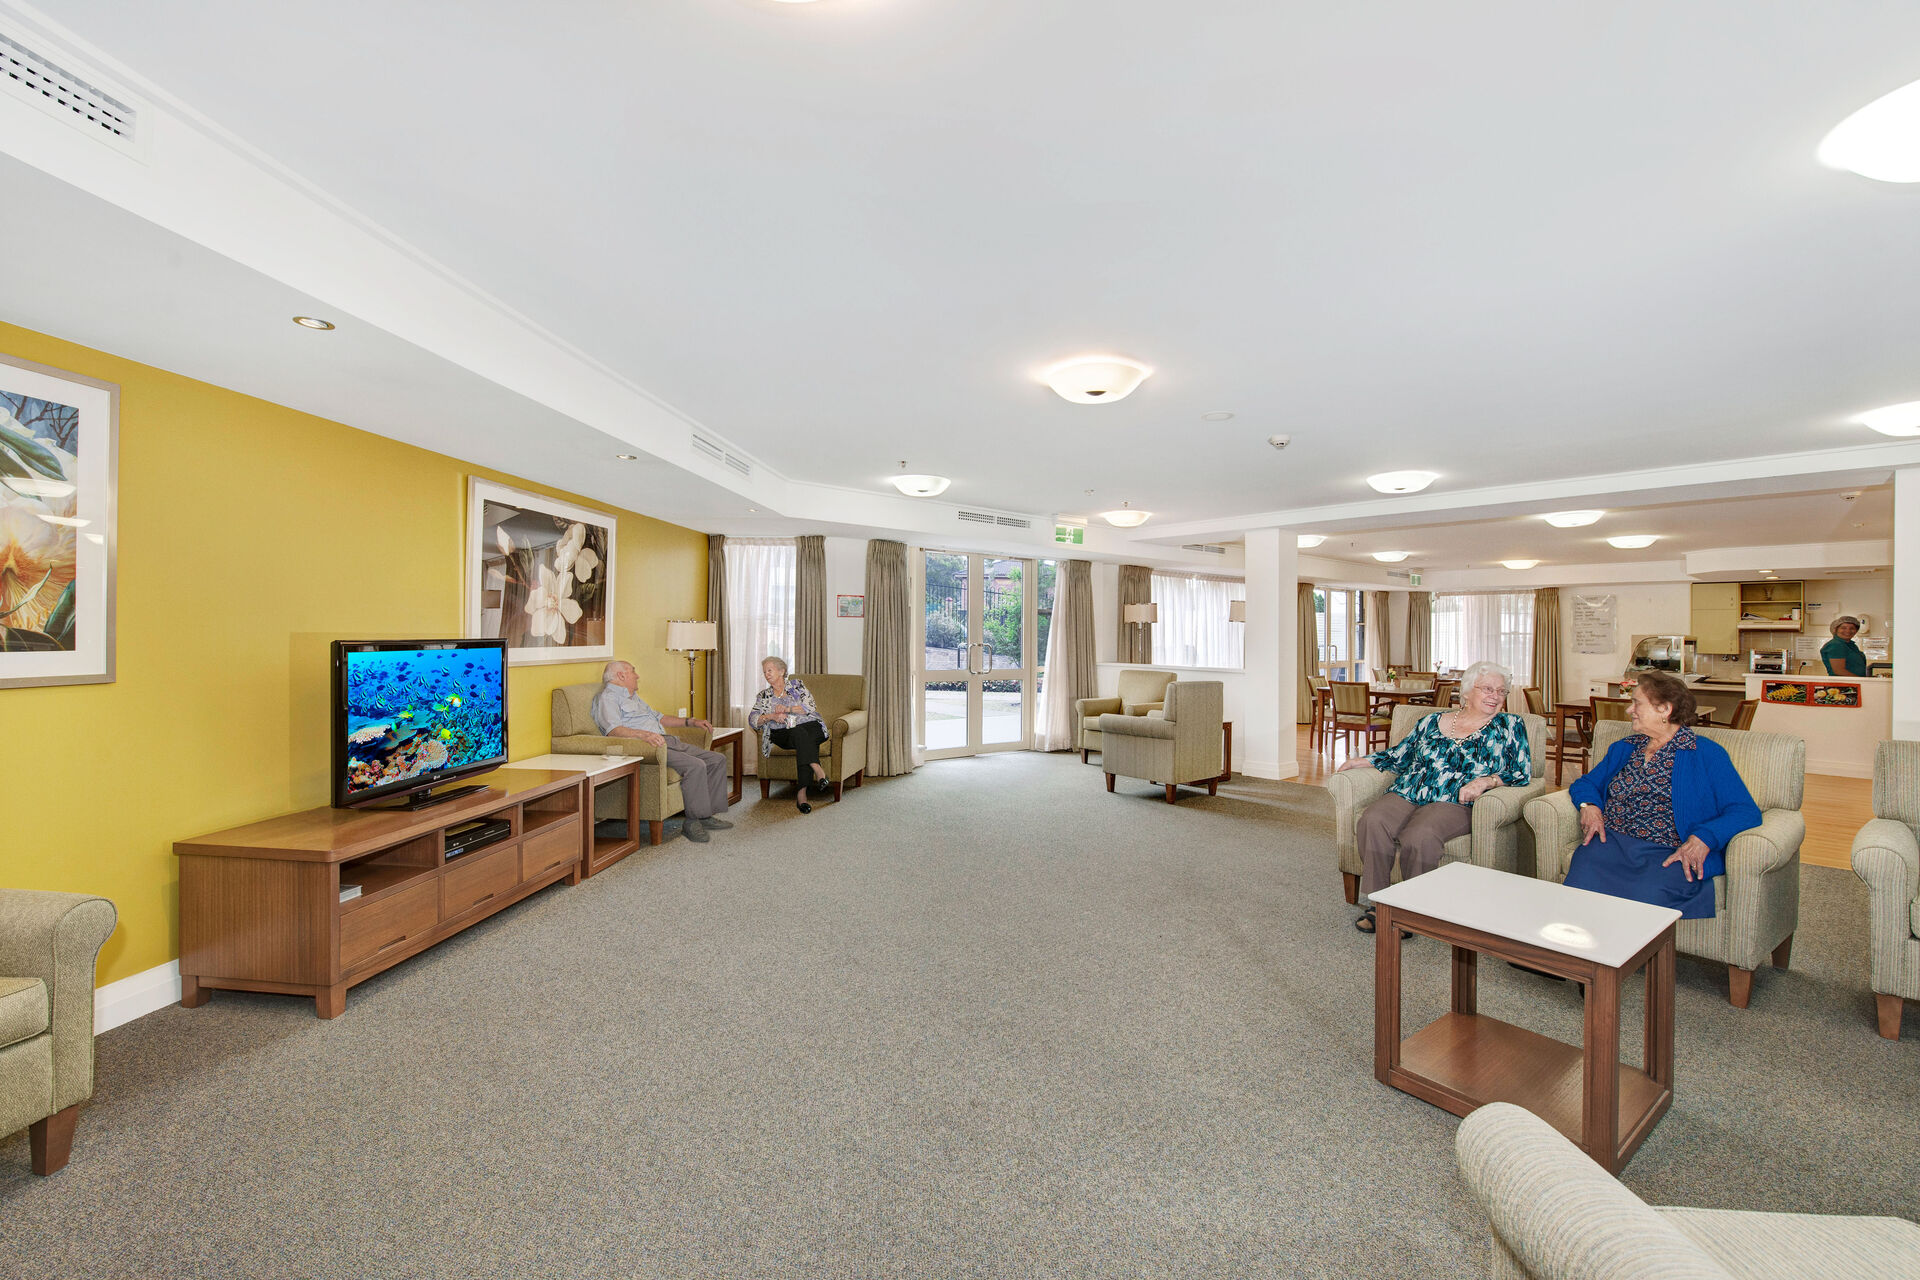 large communal lounge room with aged care residents socialising and watching television at baptistcare warena centre in bangor sutherland shire nsw